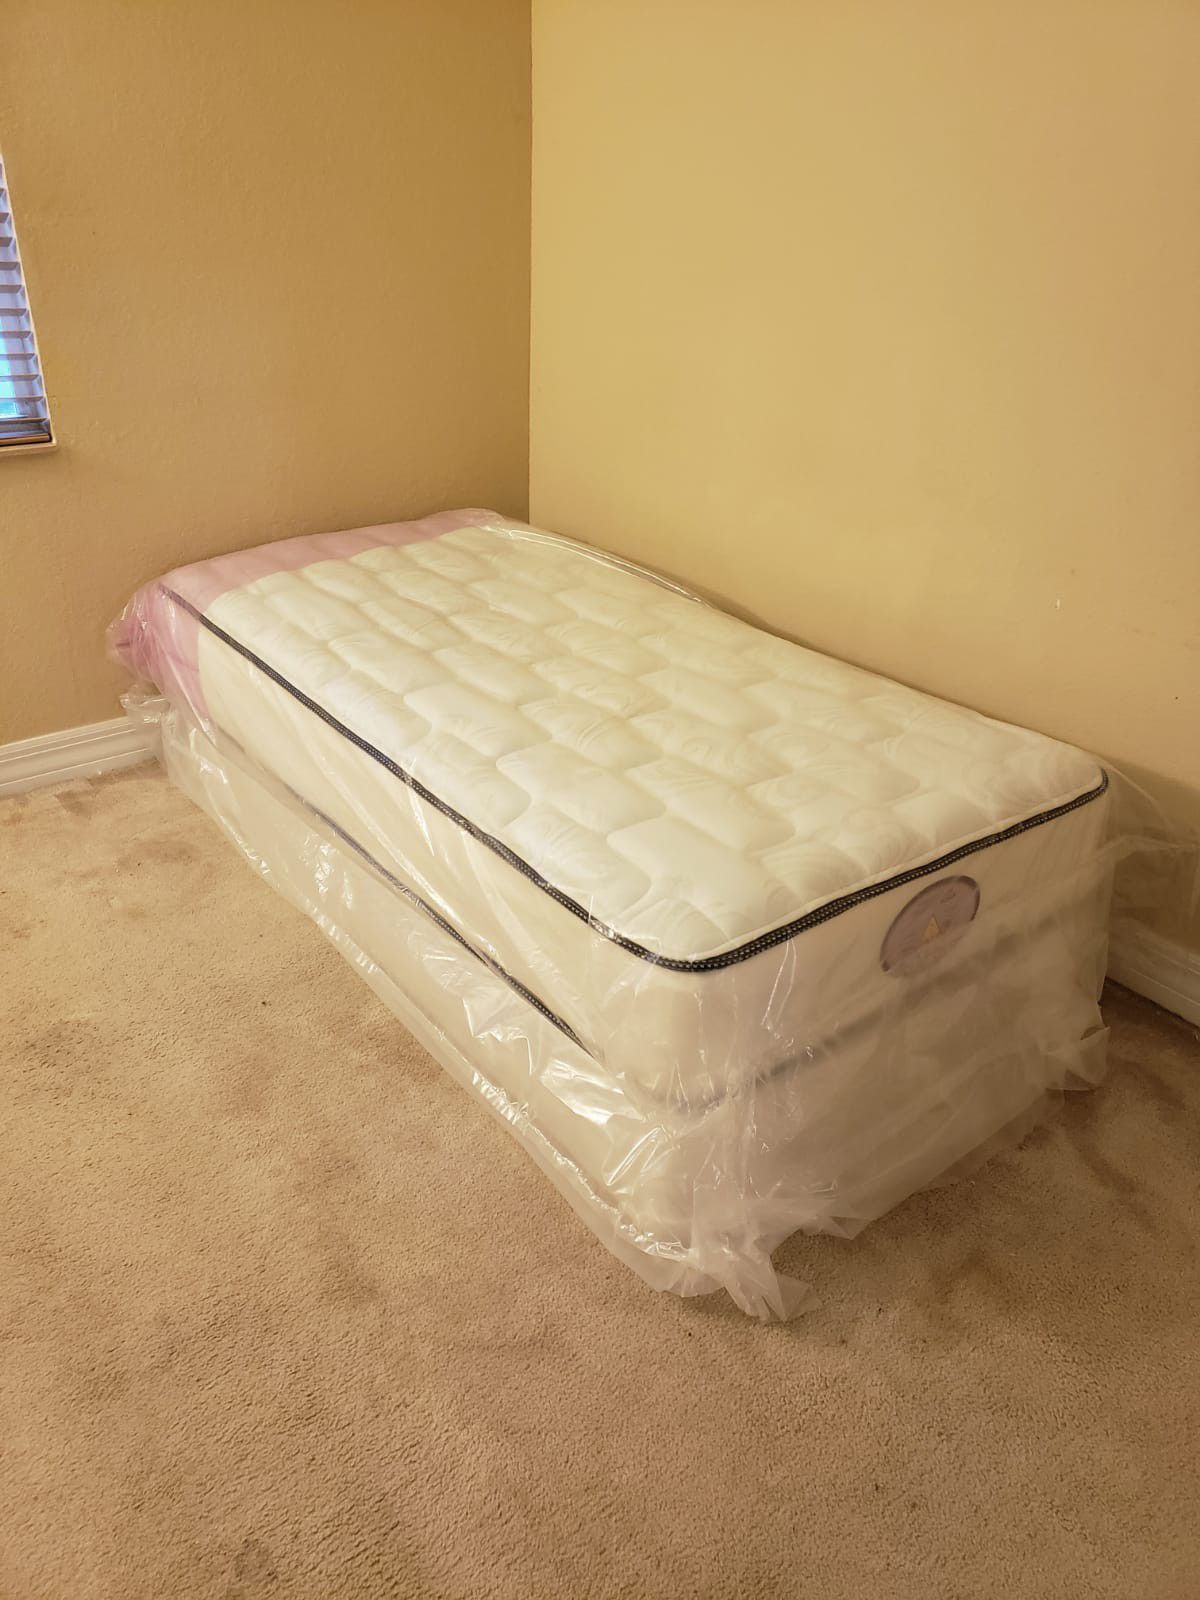 NEW TWIN MATTRESS AND BOX SPRING SET, bed frame not included on price